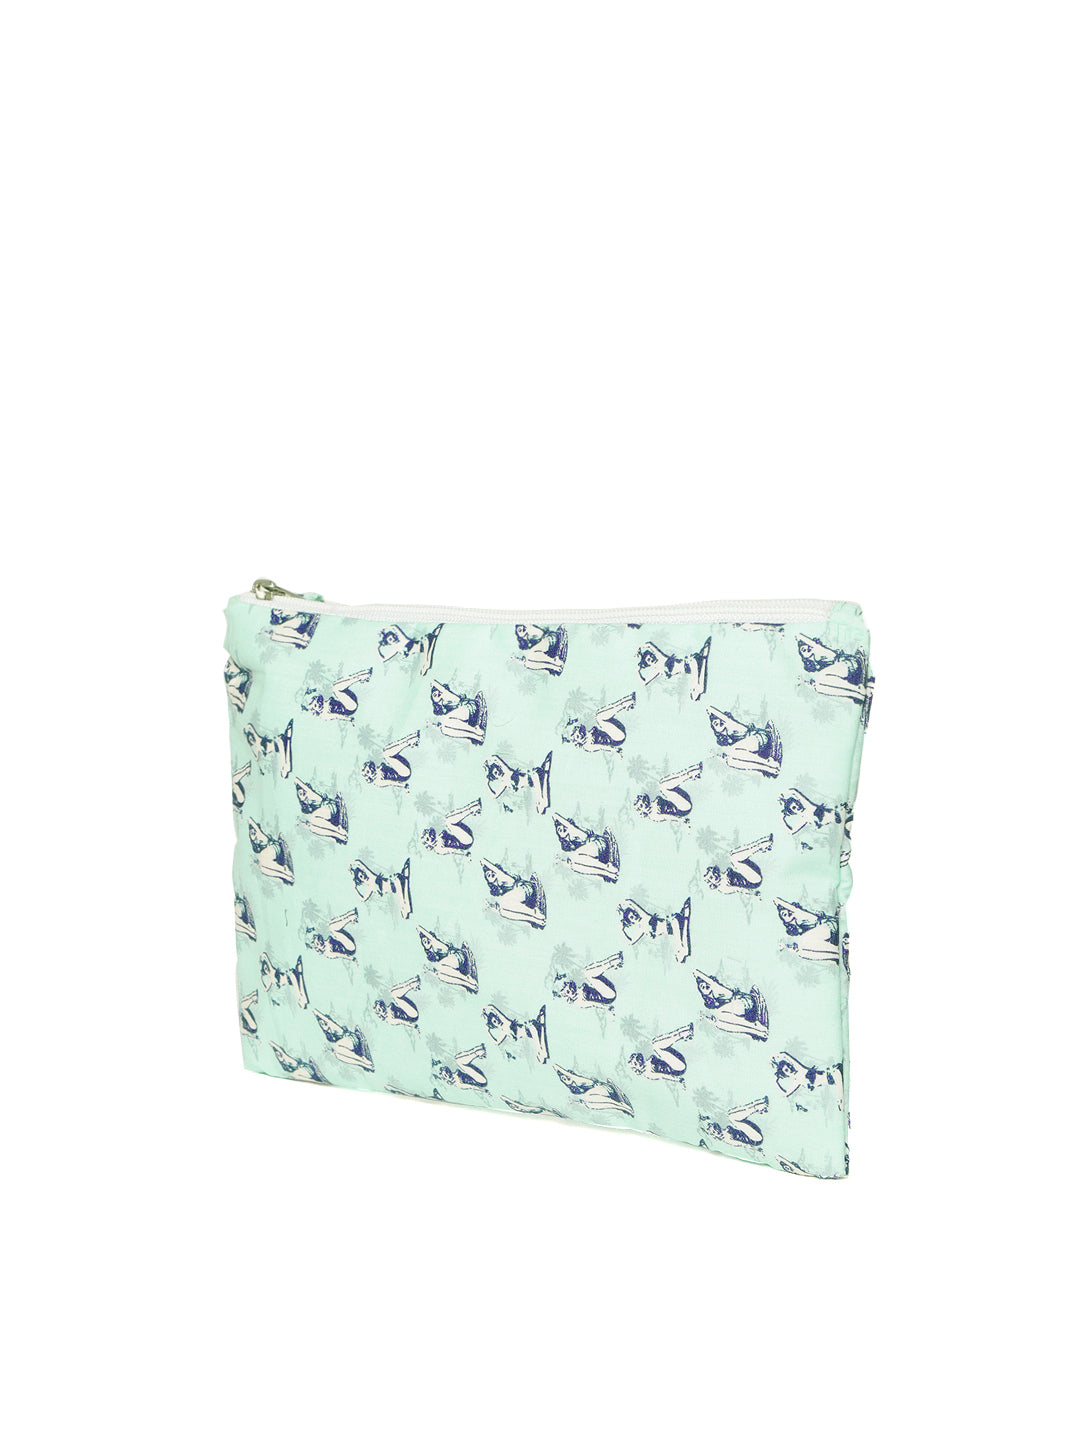 Blueberry multi color printed pouch